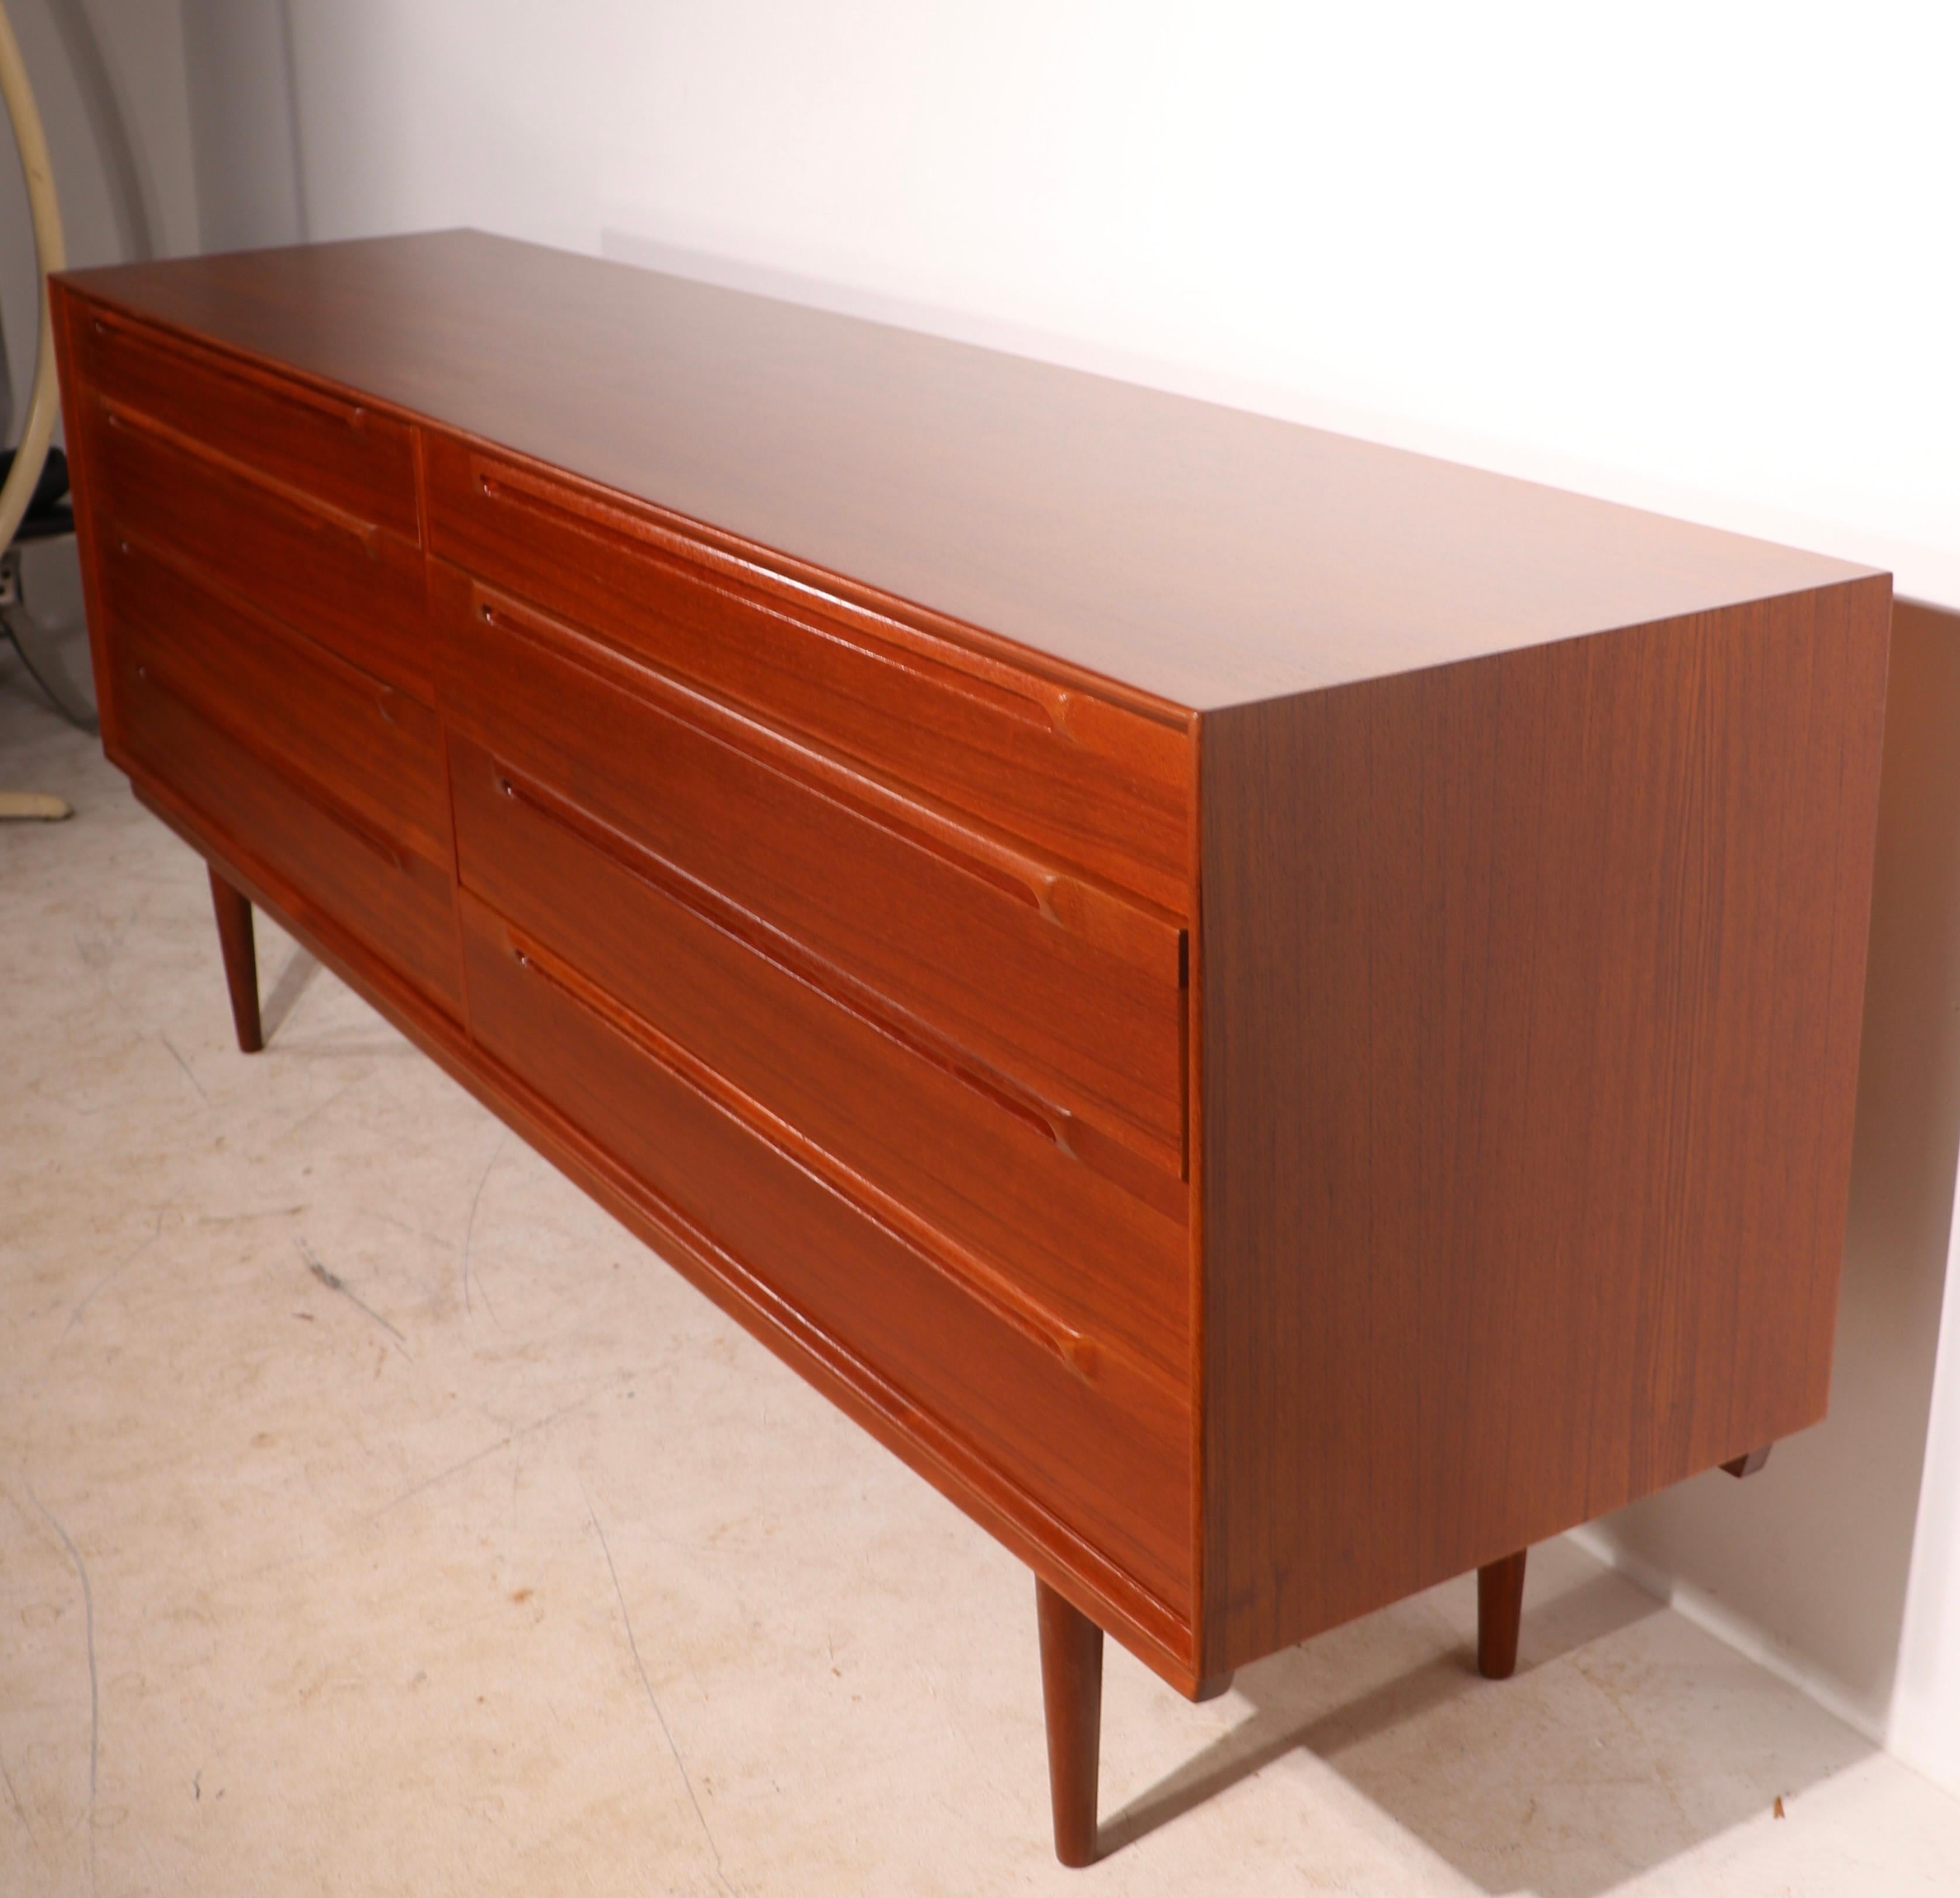 Incredible Danish Modern double dresser in exceptional refinished condition. This example features eight drawers, two banks of four drawers each, it is constructed of solid teak, and has been newly professionally refinished to perfection. Design